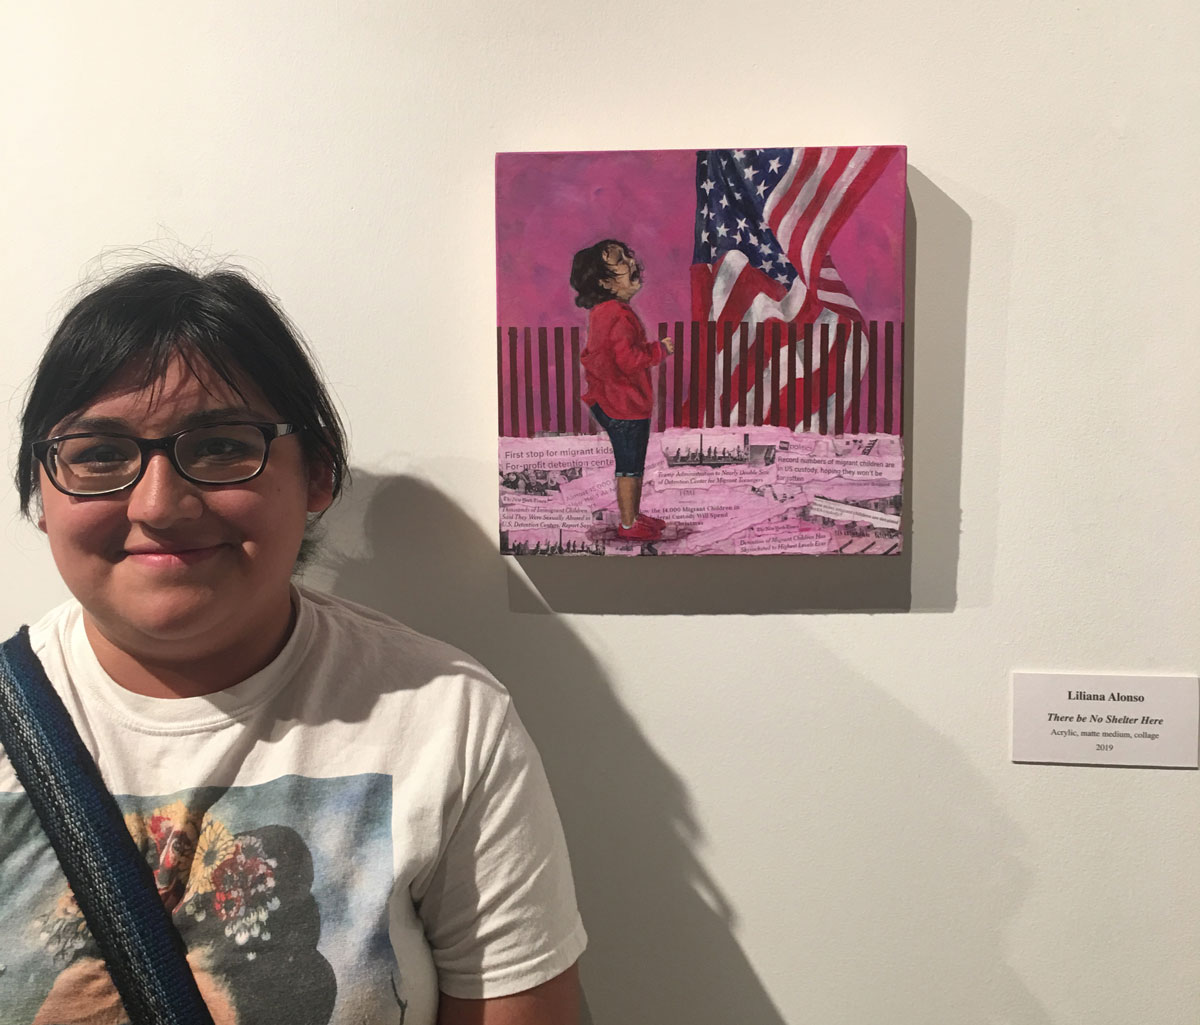 PHOTO: Liliana Alonso, art and design alumnae, won the competition with her mixed-media painting "There be No Shelter Here." Photo by The Signal Online Editor Alyssa Shotwell.